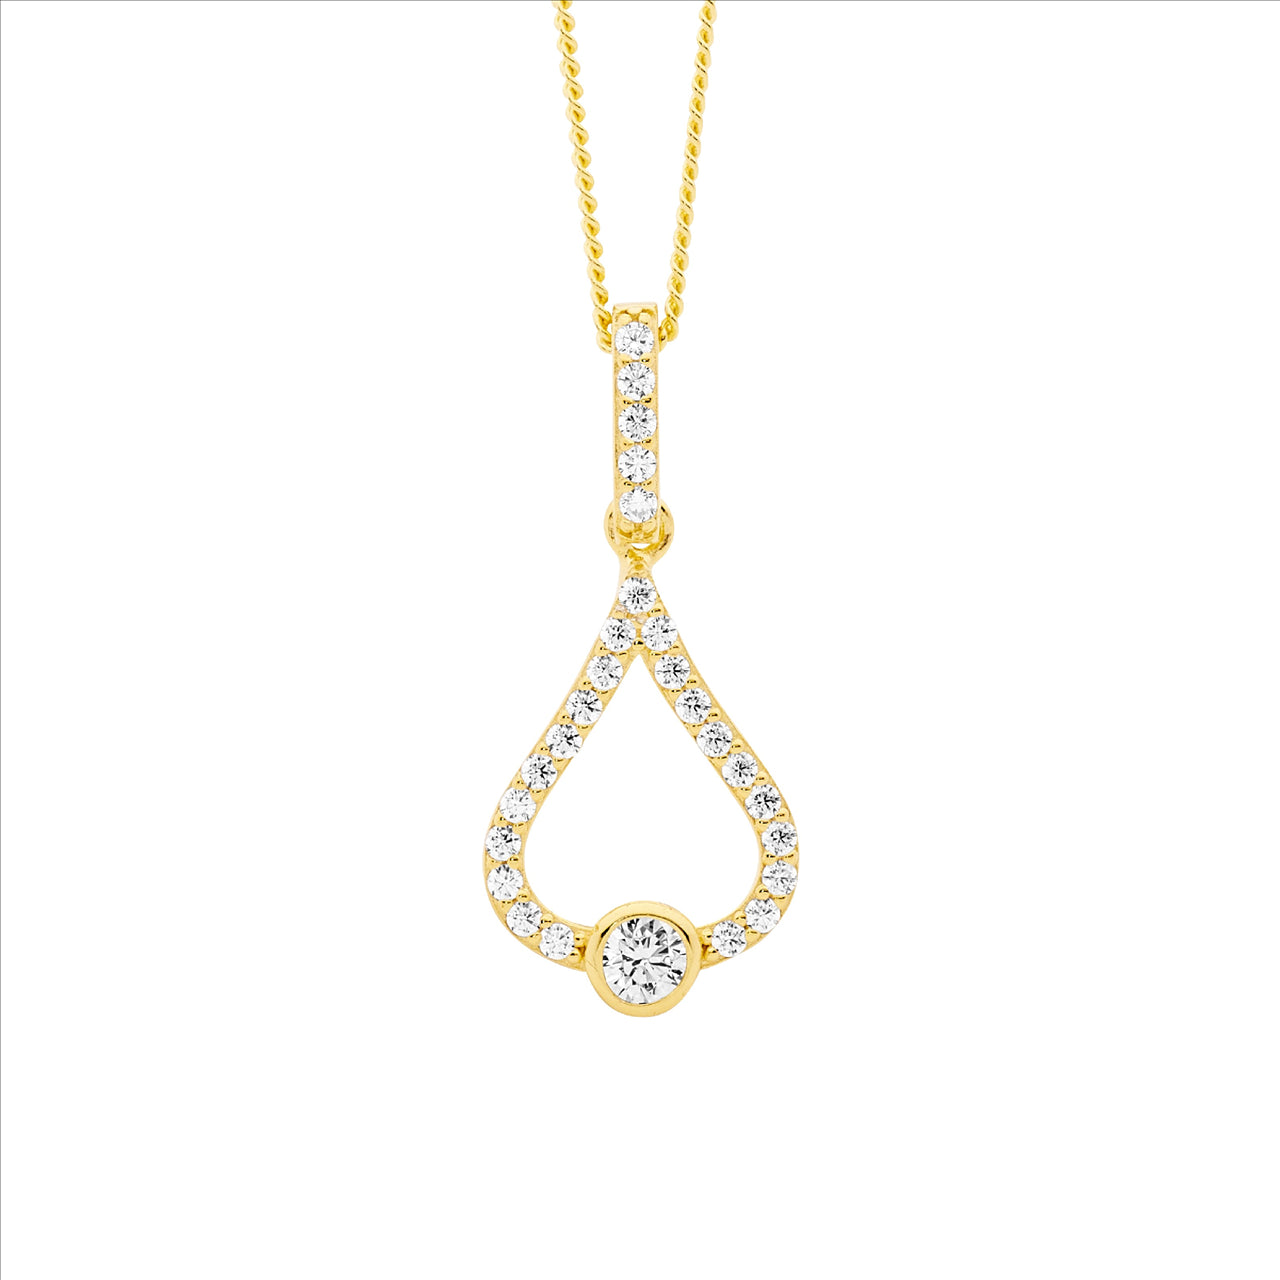 Ellani Sterling Silver Yellow Gold Plated White Cubic Zirconia Tear Drop Shaped Necklace